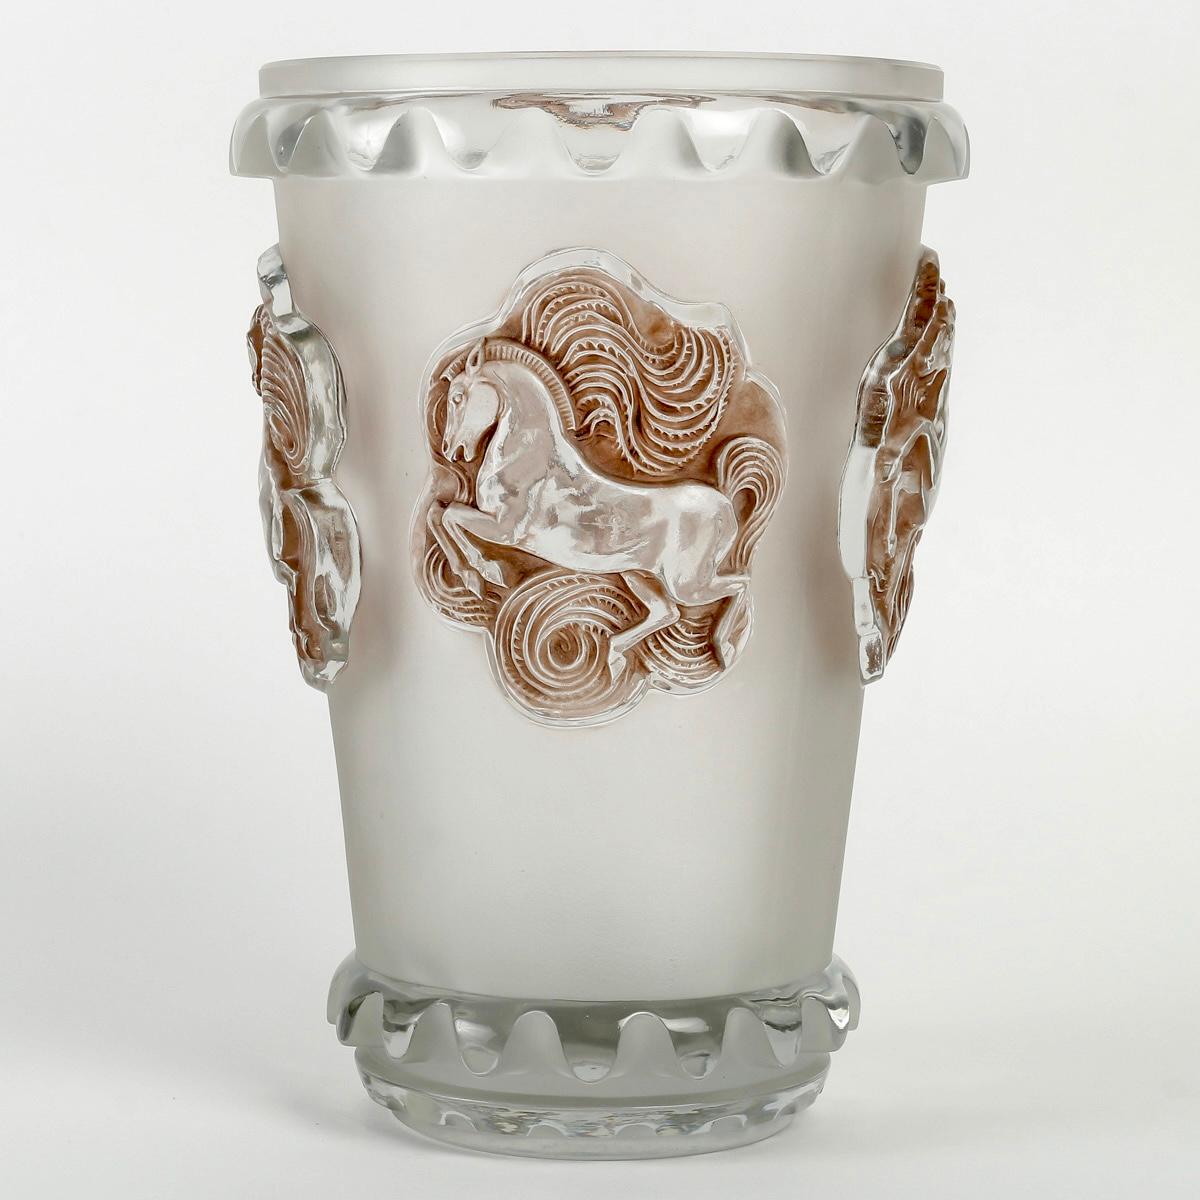 Molded 1942 Rene Lalique Vase Camargue Frosted Glass with Sepia Patina For Sale